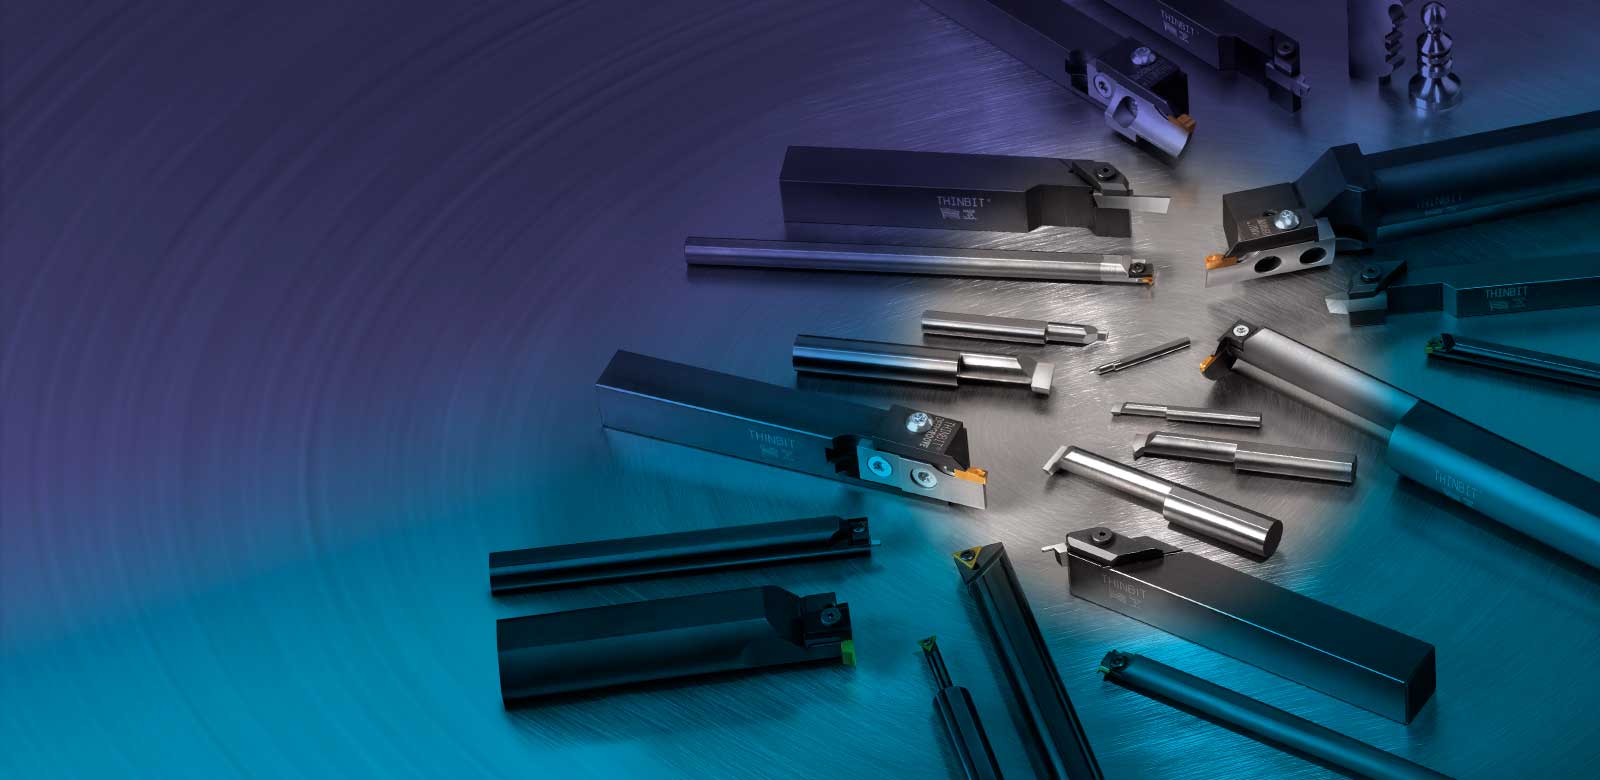 Linked image showing all the ThinBIT® complete tooling application solutions.